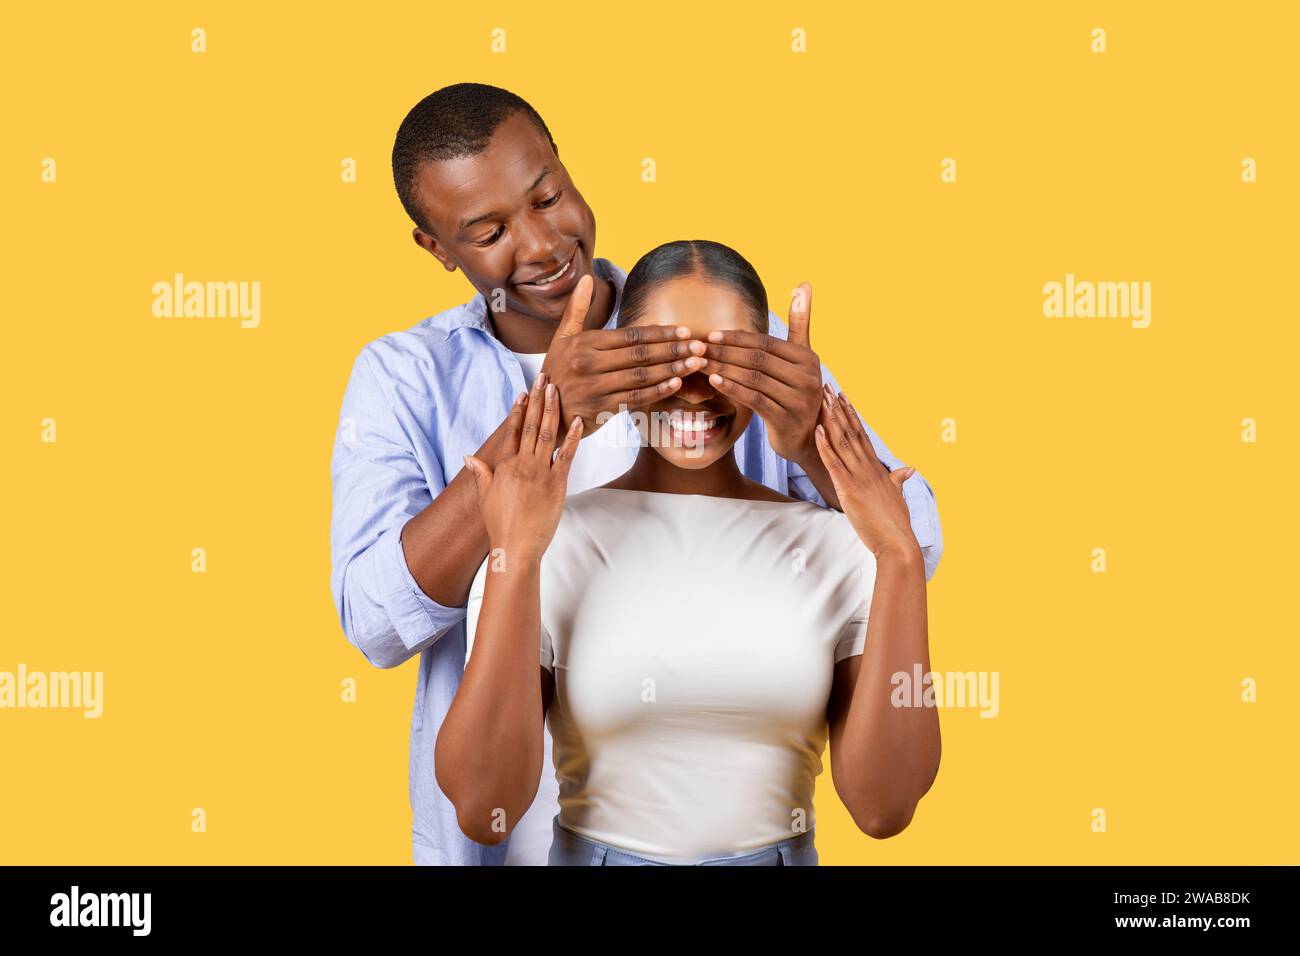 Black man covering woman's eyes with hands, both smiling on yellow Stock Photo